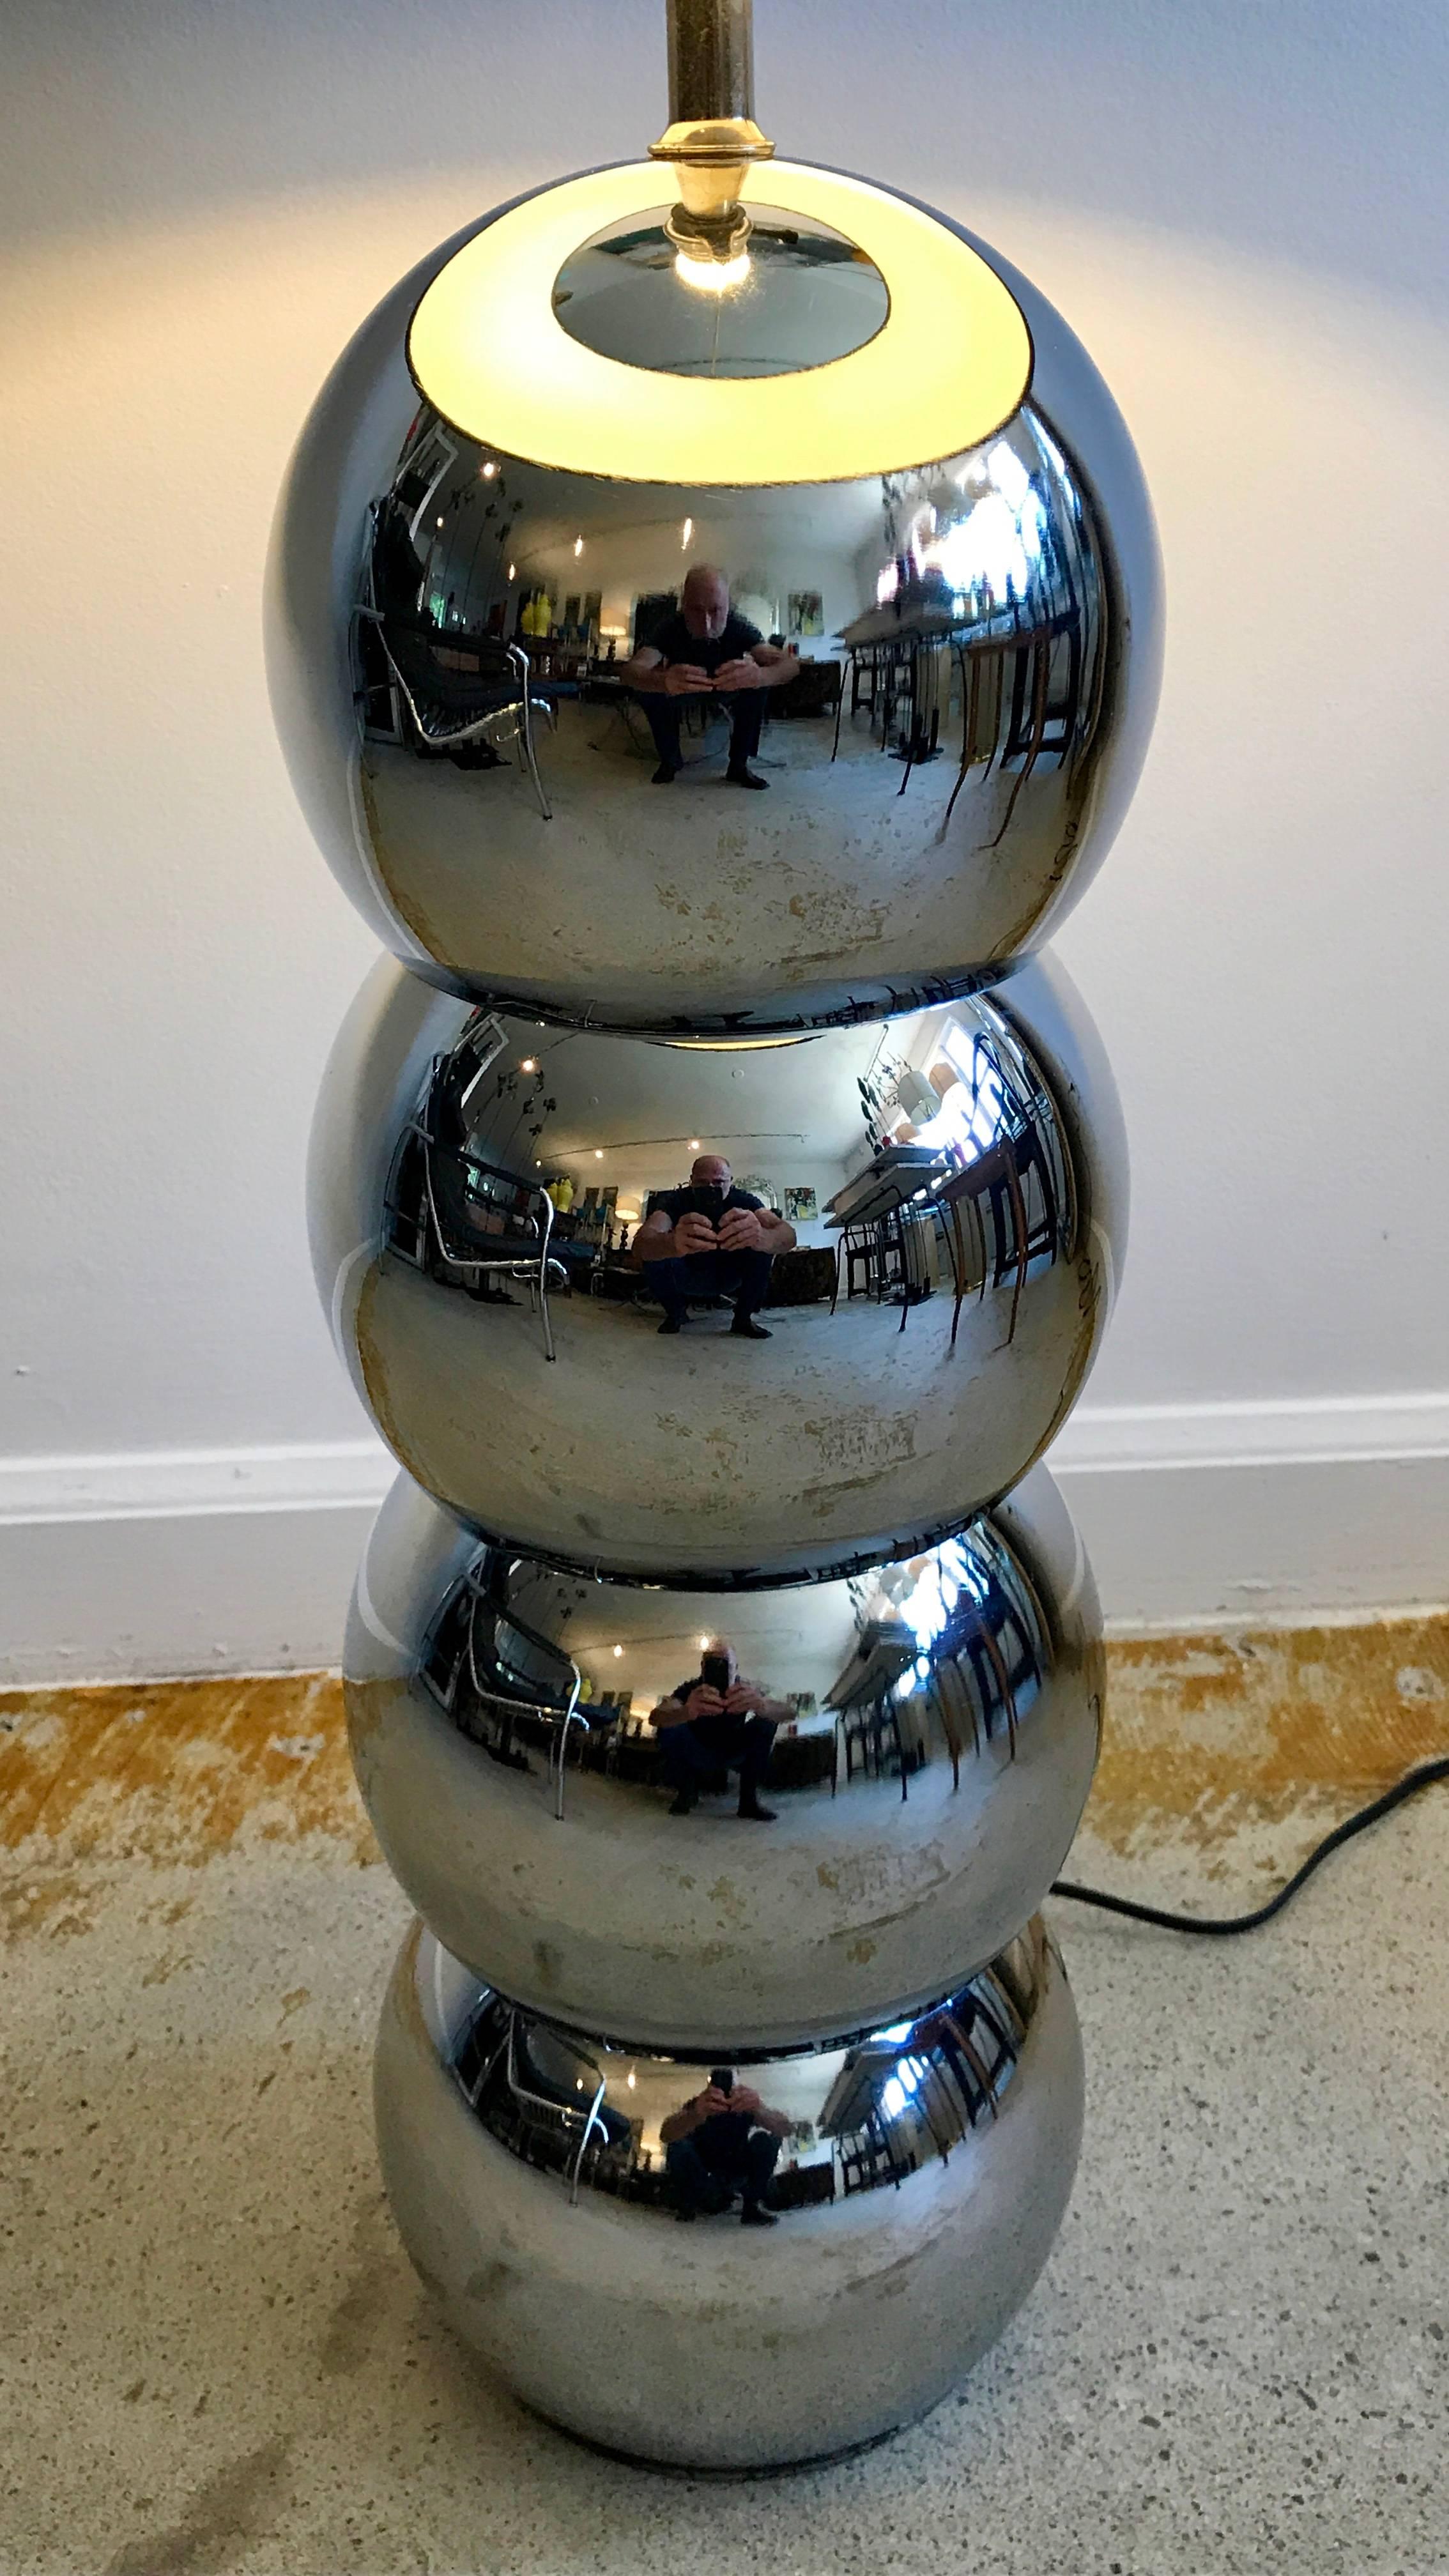 Iconic pair of chrome stacked ball table lamps by George Kovacs, 1970s. Minor pitting but hardly noticeable, tiny crease on one ball, see photos. Re-wiring recommended, shades not included.